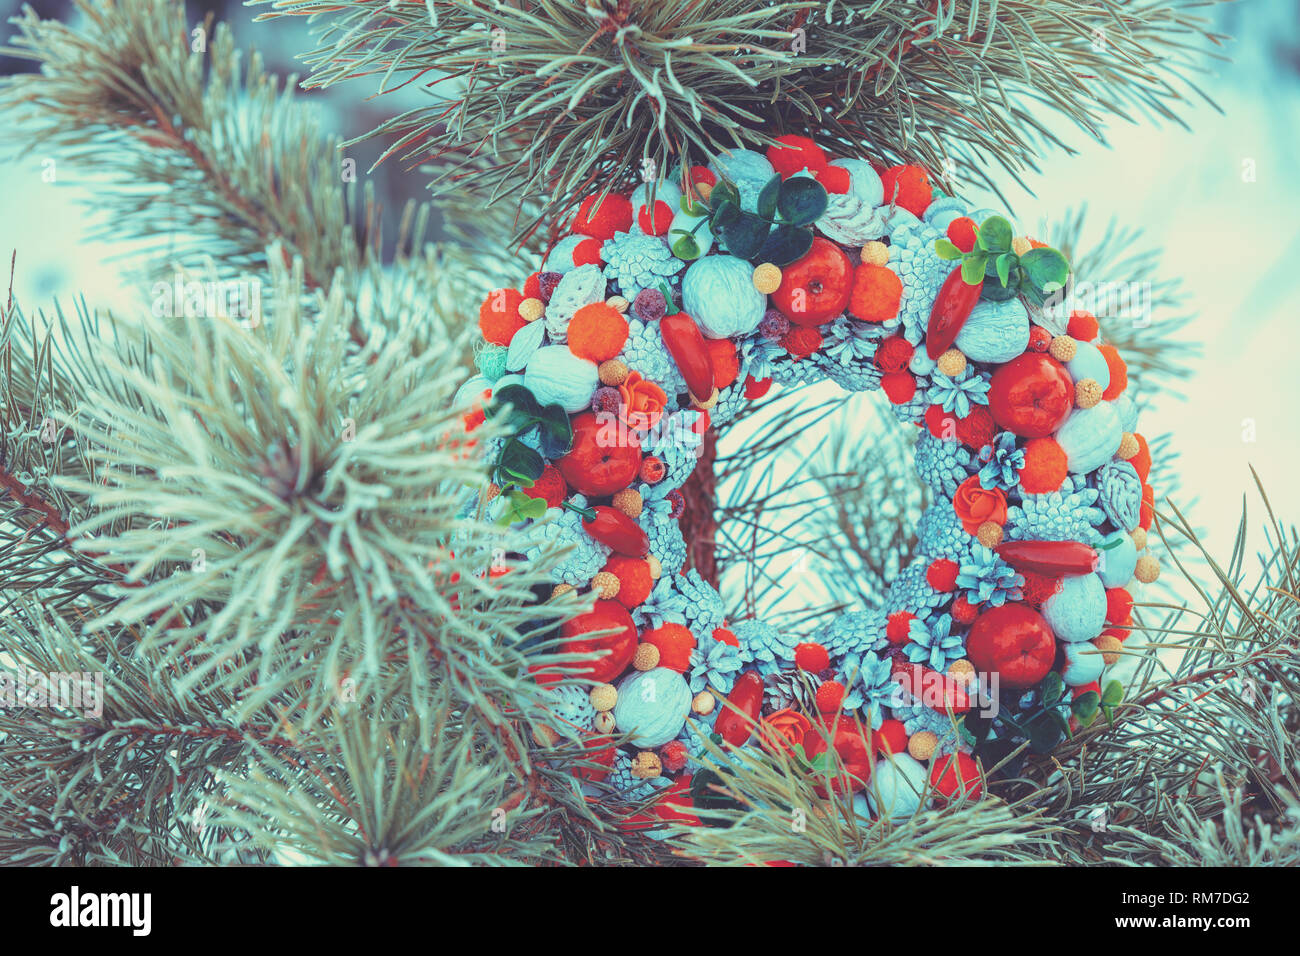 Pine branches and Christmas wreath background Stock Photo